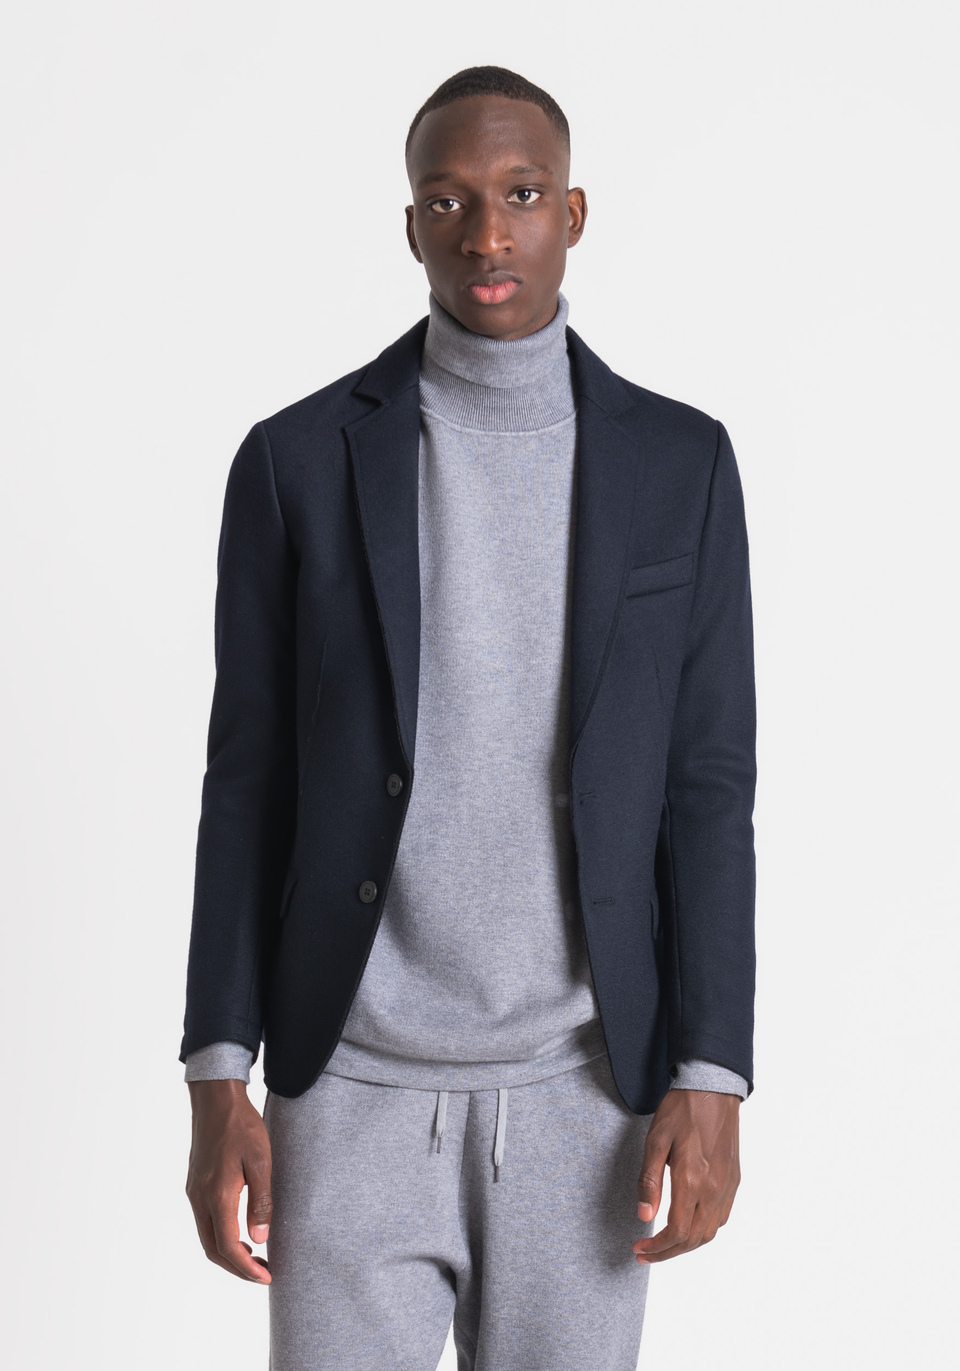 SUPER-SLIM-FIT “TRACY” JACKET IN A WOOL BLEND WITH RAW-CUT DETAILING - Antony Morato Online Shop